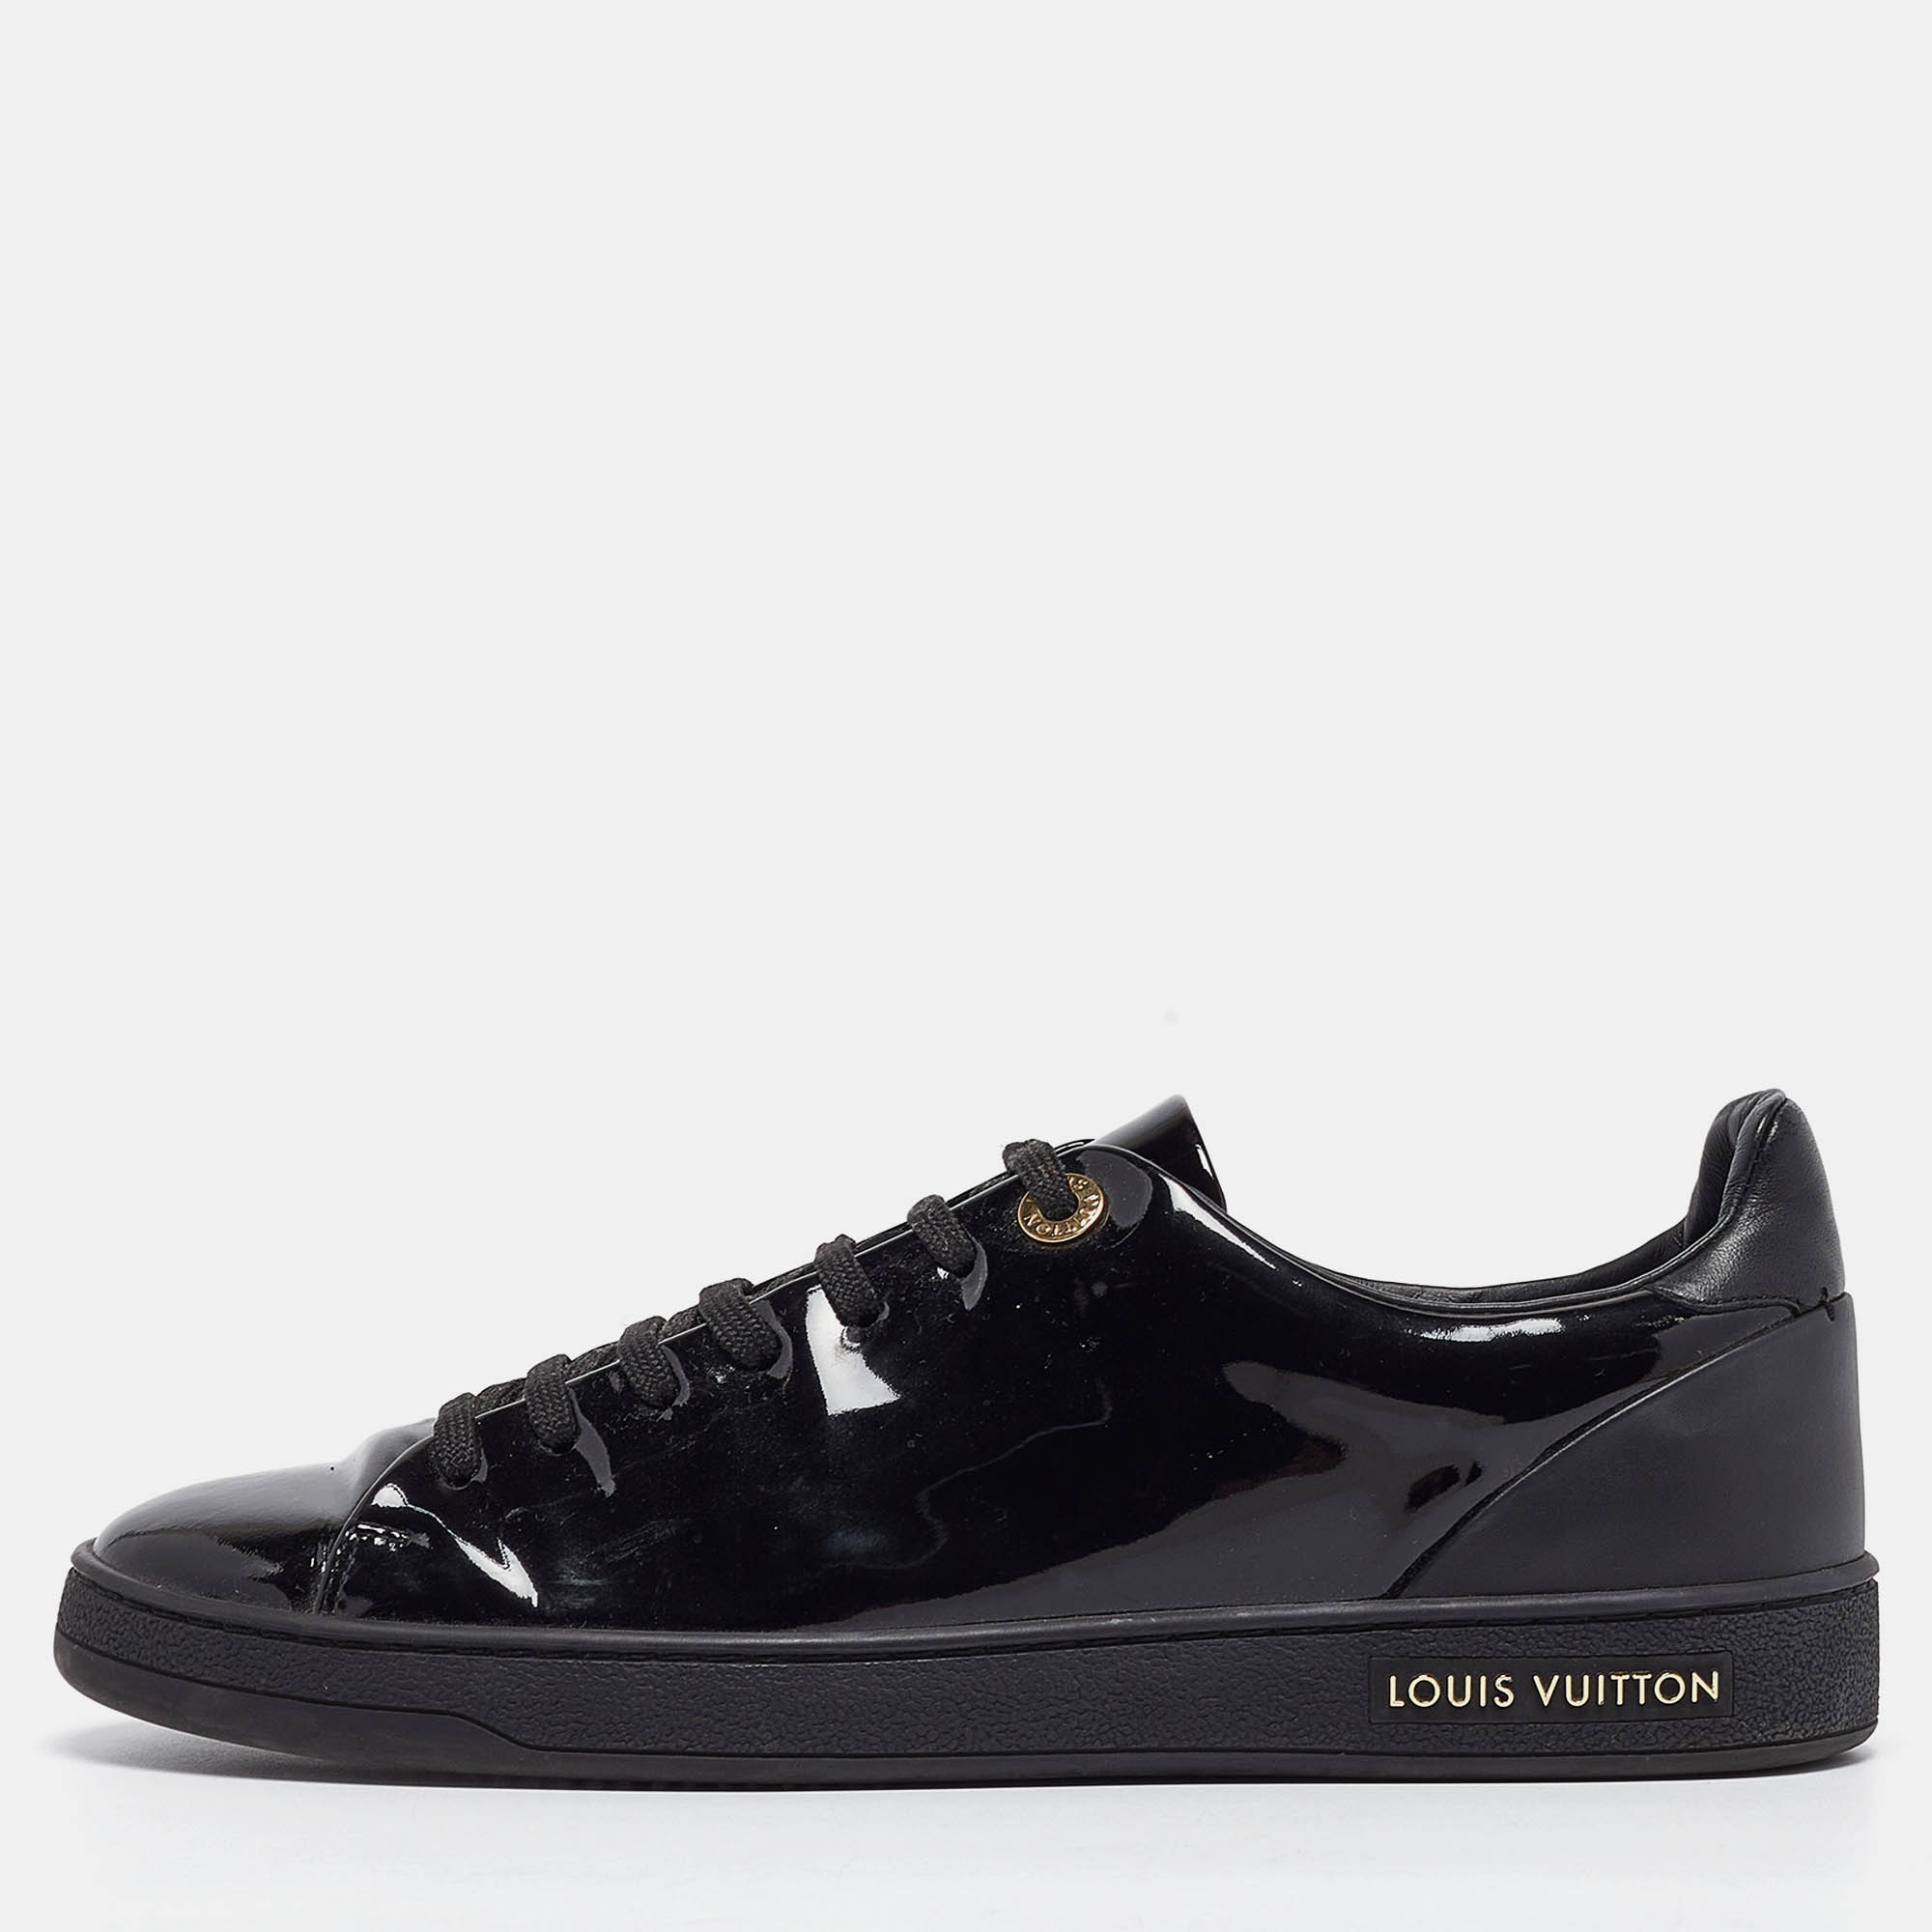 Louis vuitton black patent leather frontrow sneakers size 37.5